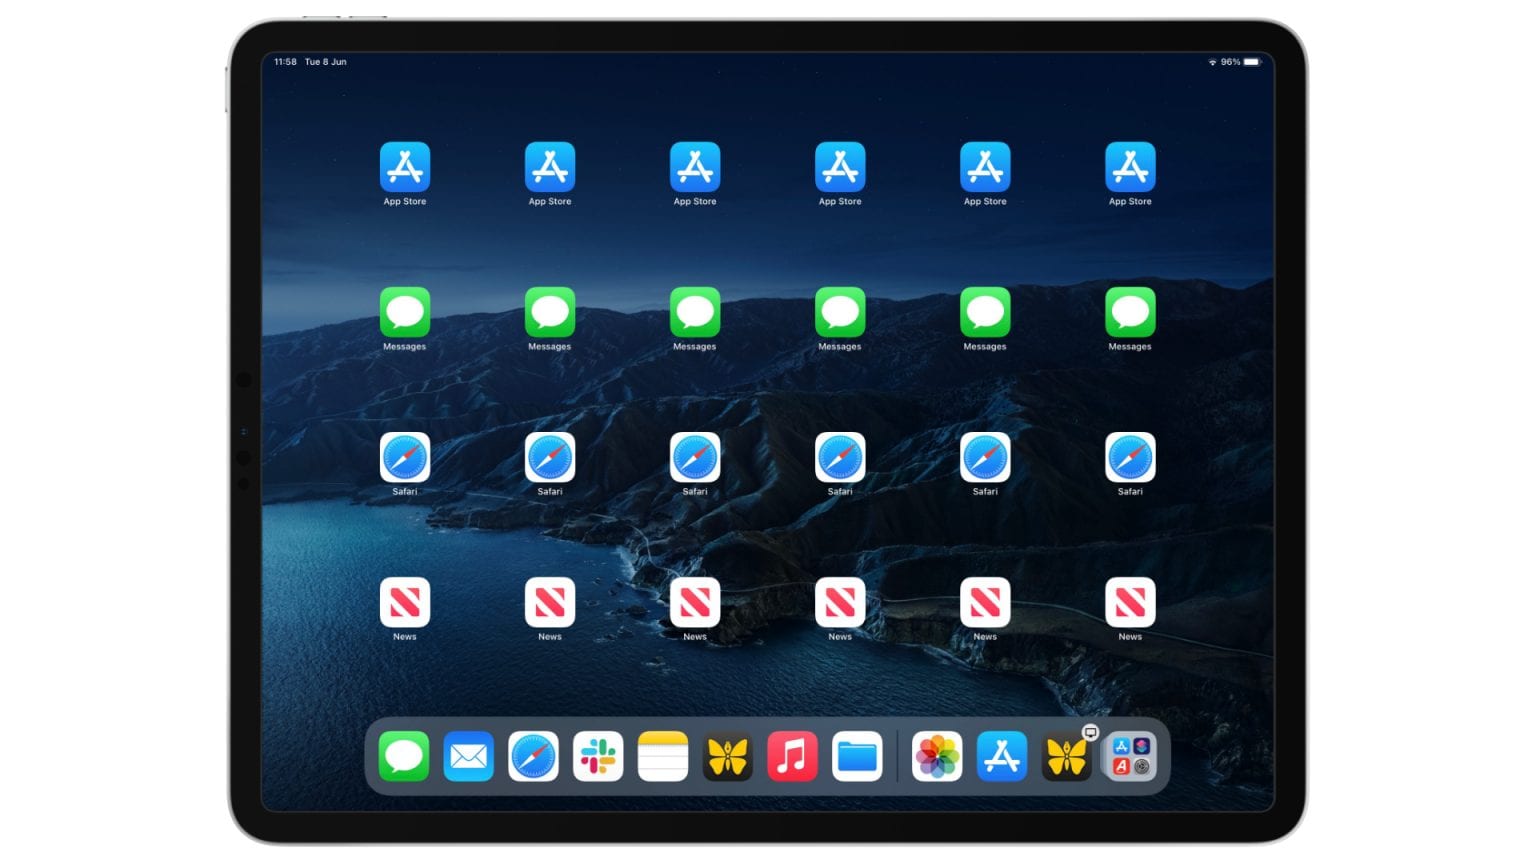 iOS 15 lets you put the same app on multiple Home screens